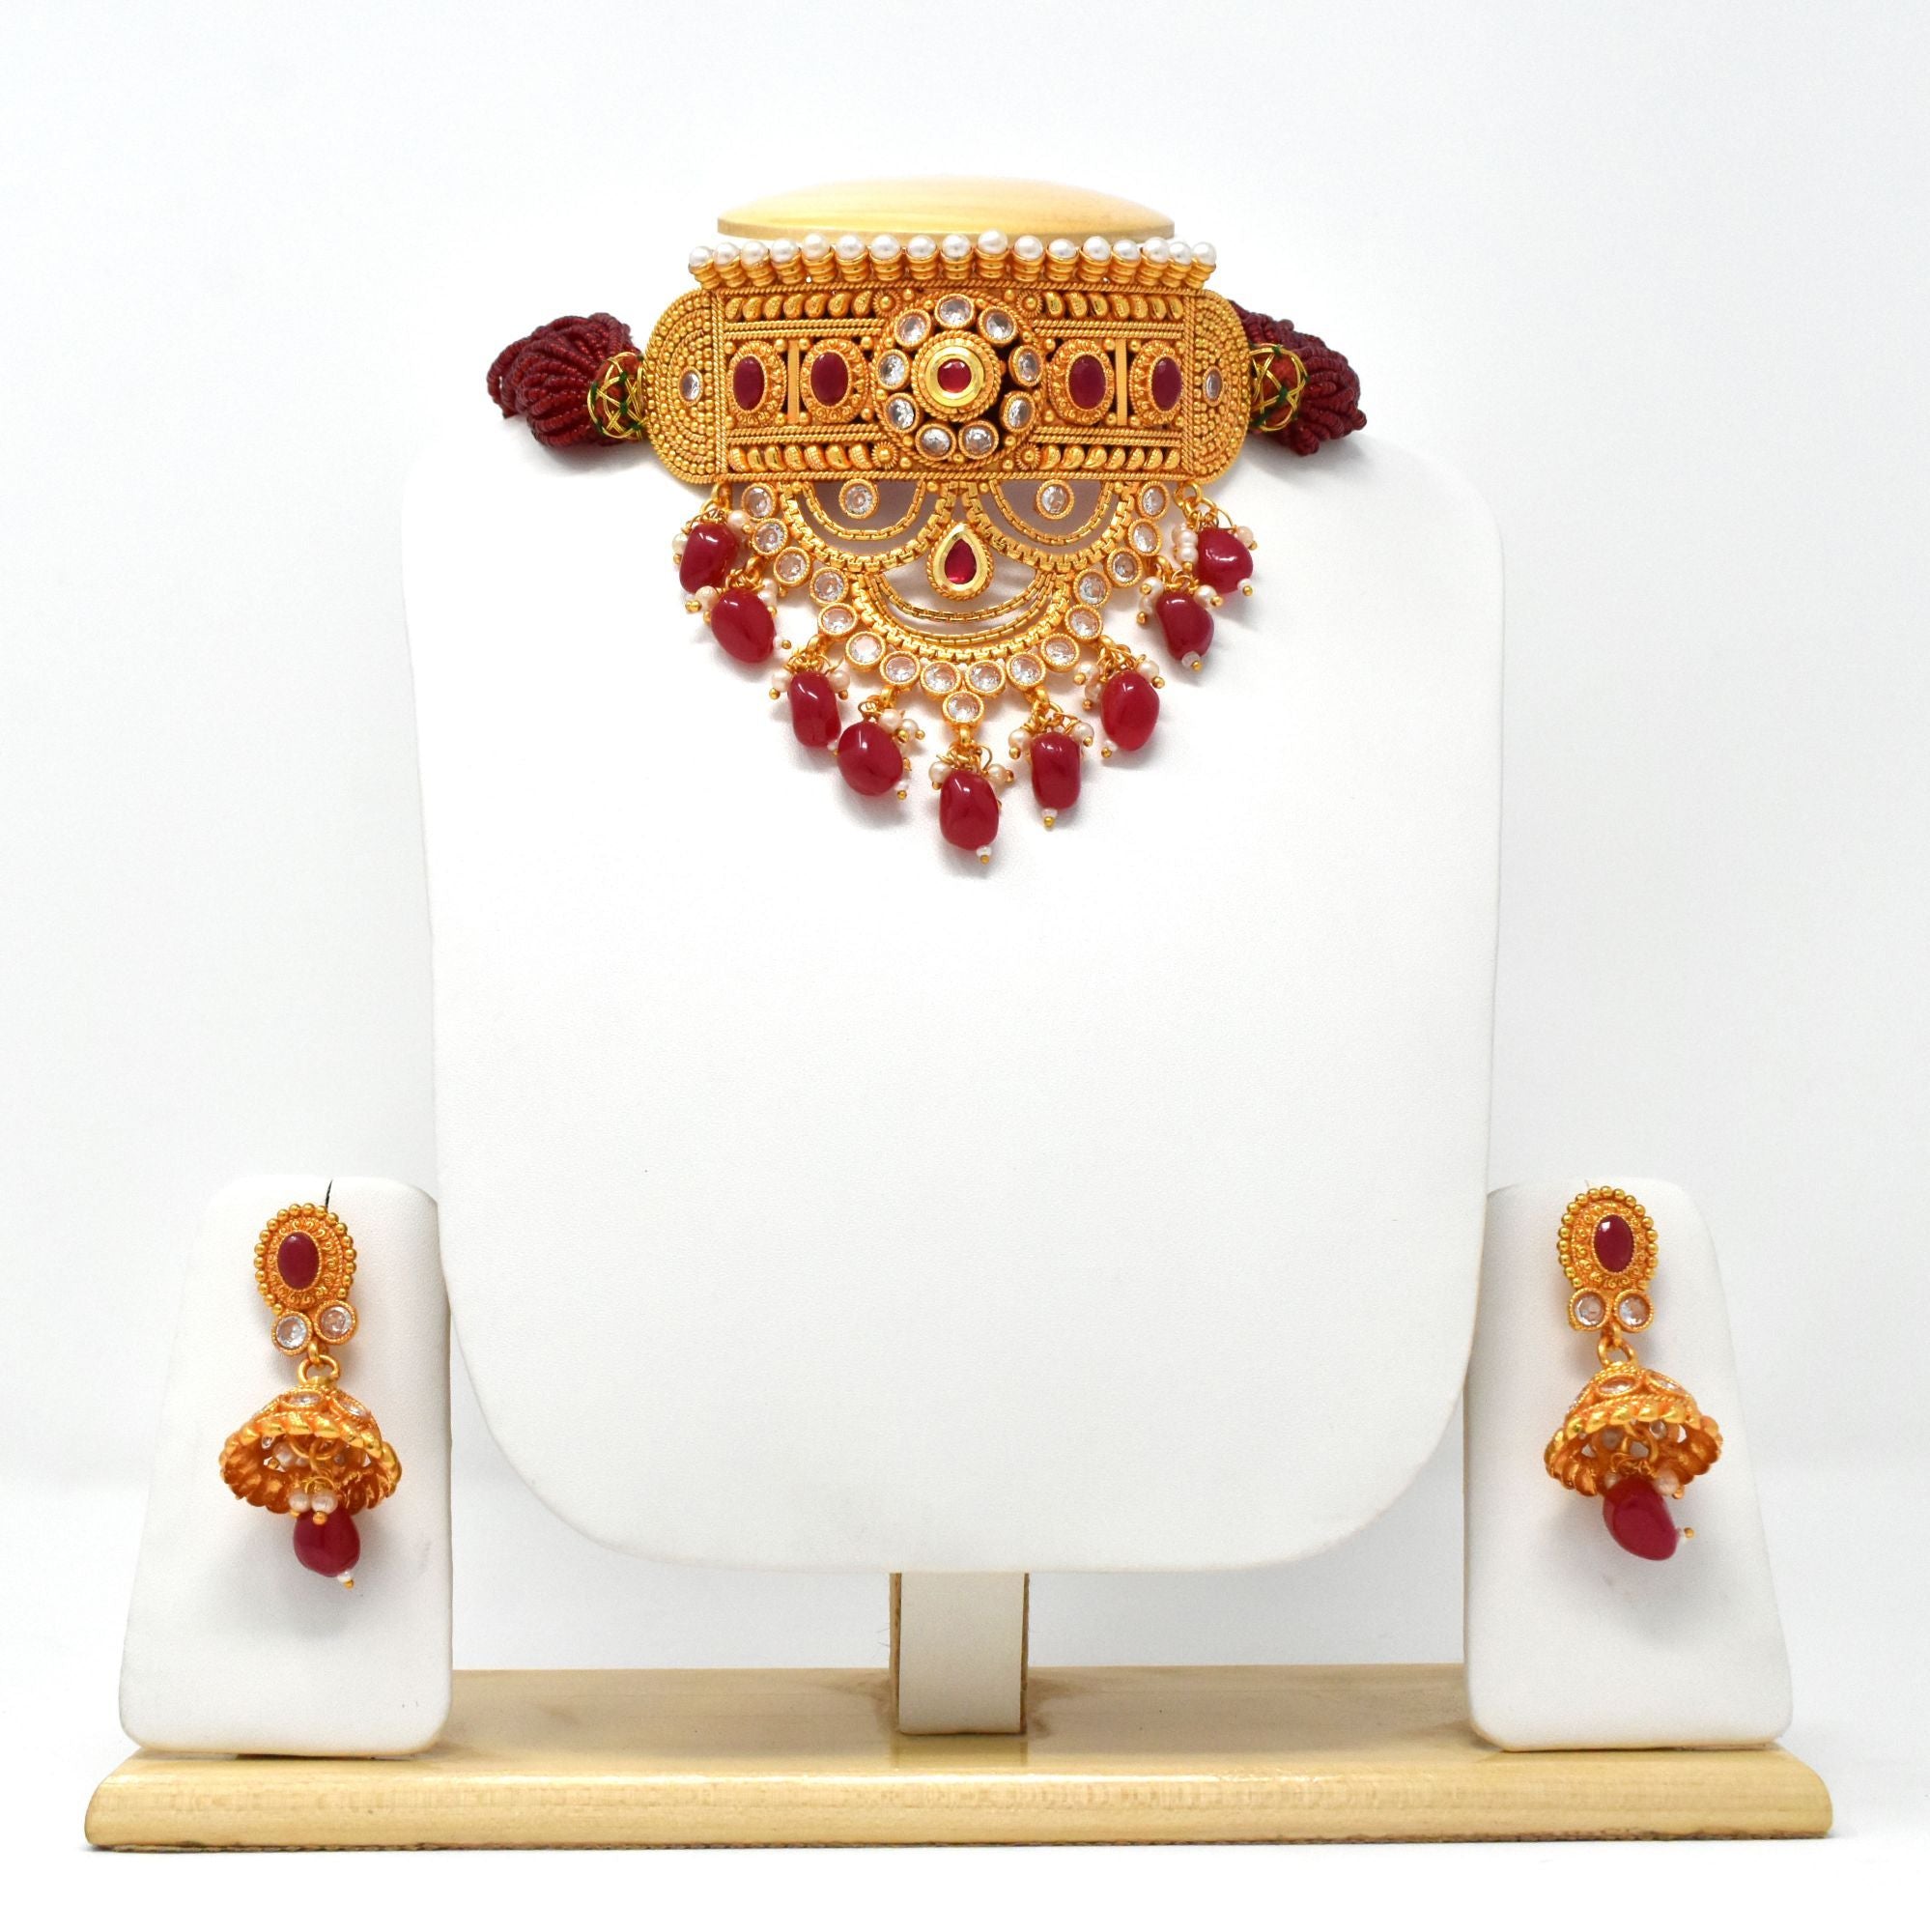 Gold Plated Rajputi Aad studded with Beads and Pearls.